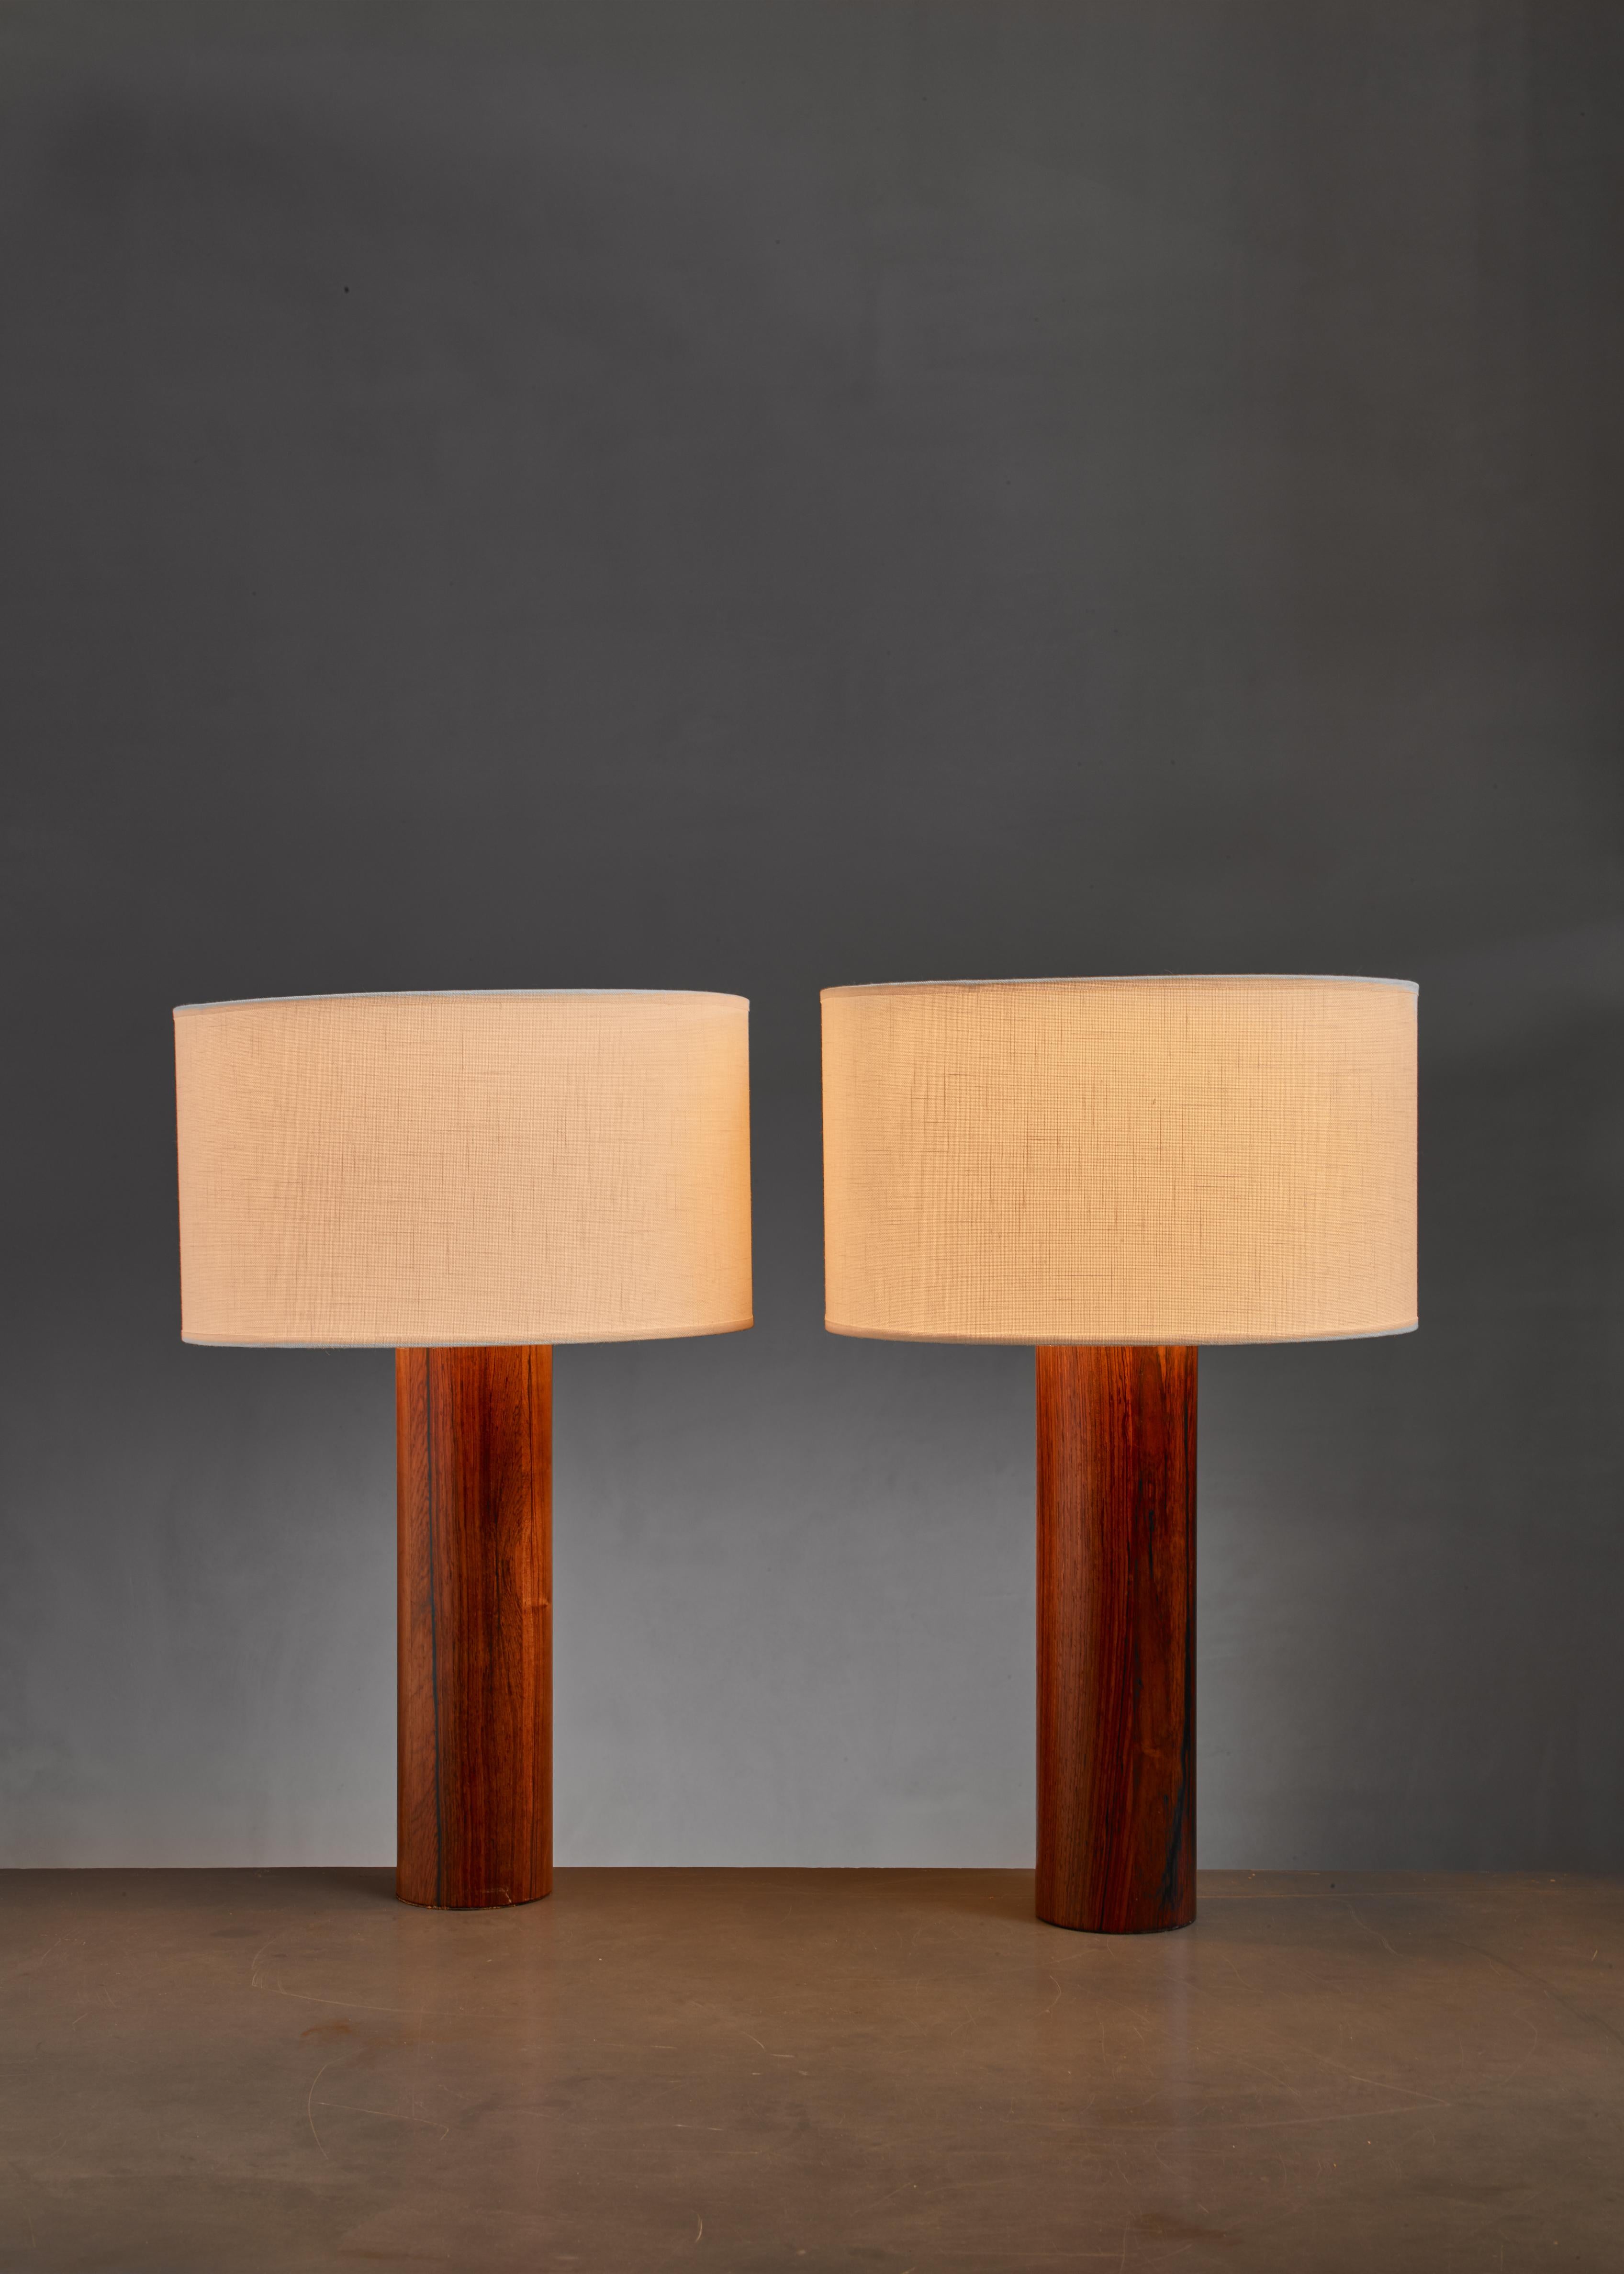 A pair of cylindrical, wooden table lamps by Uno & Östen Kristiansson for Luxus. 

Labeled by Luxus. The measurements stated are of the lamps without the fabric shade.
Base height excl. lamp holder: 36 cm / 14.17 inch
Shade dimensions are: